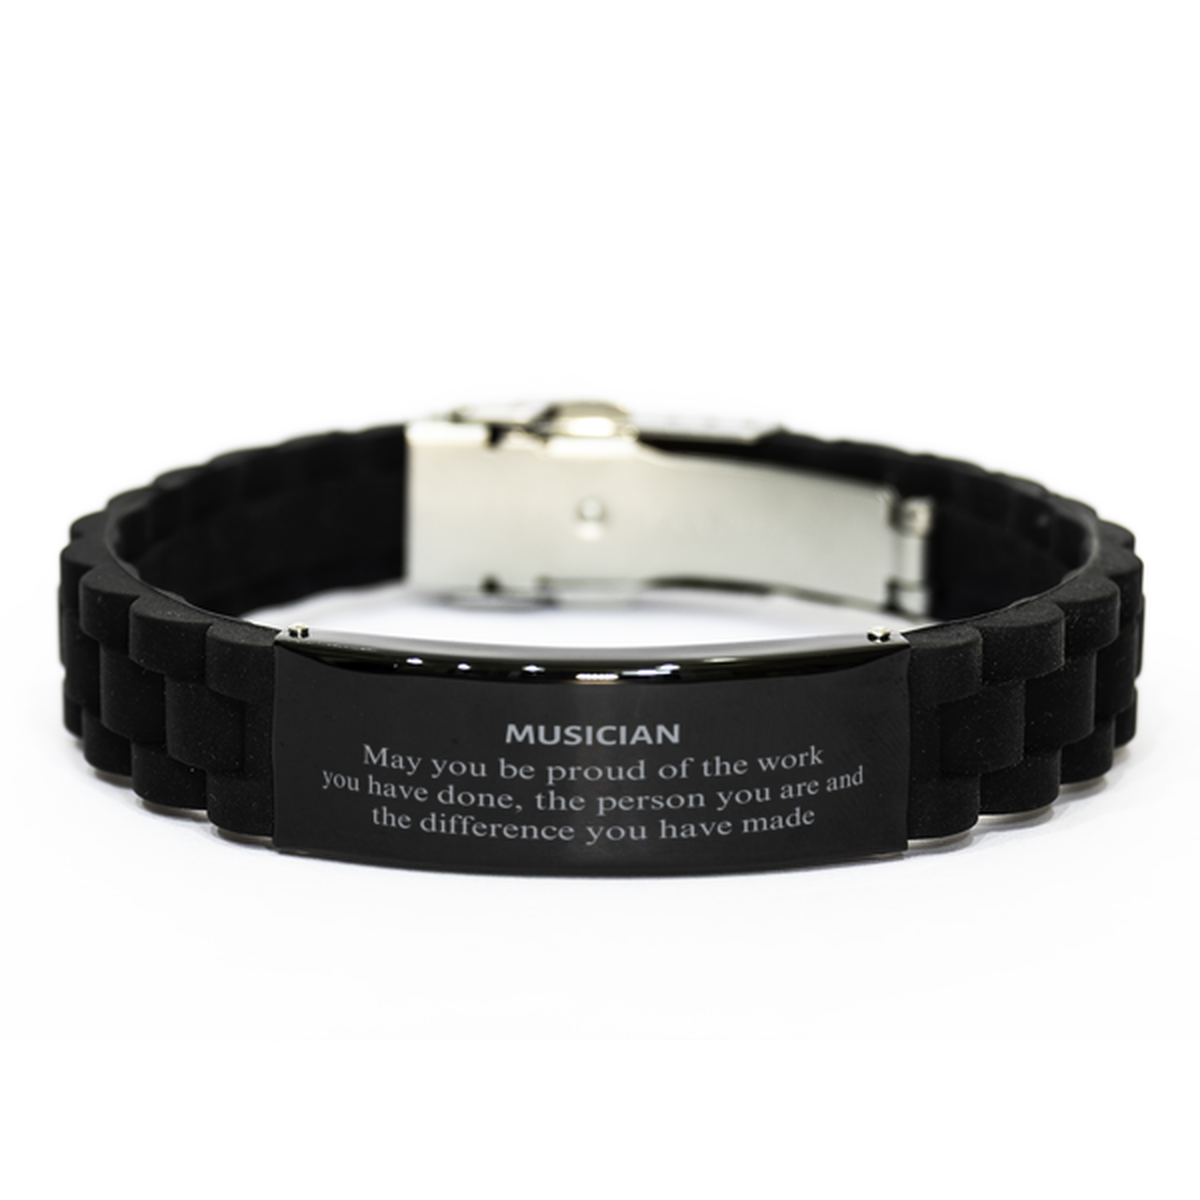 Musician May you be proud of the work you have done, Retirement Musician Black Glidelock Clasp Bracelet for Colleague Appreciation Gifts Amazing for Musician